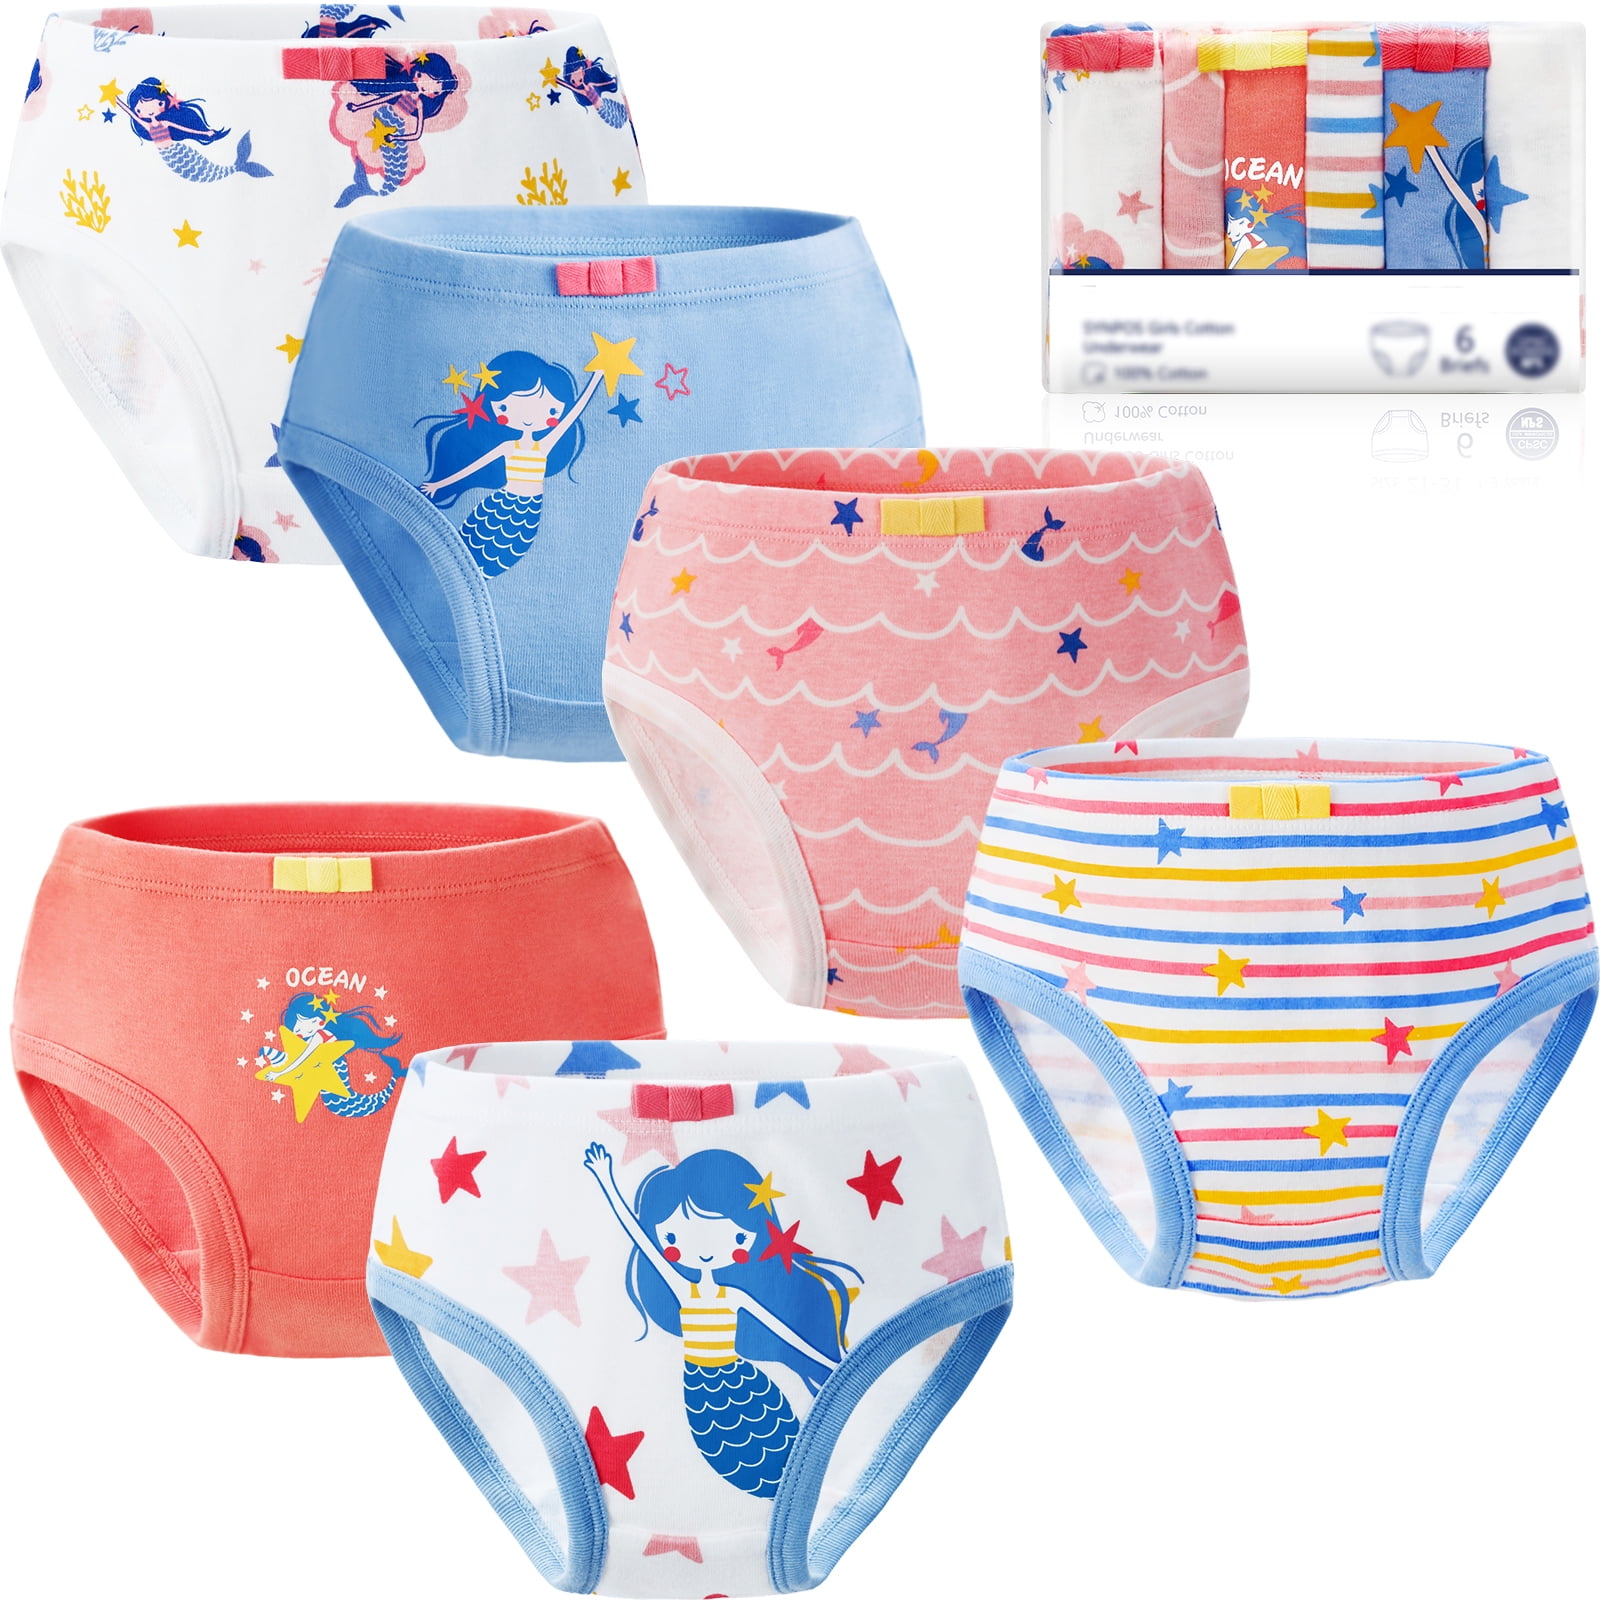 VYM Kid's/Girl's Cotton High Quality Disney Character Underwear Panty  2-10yrs assorted 6pcs kids panty good quality panty